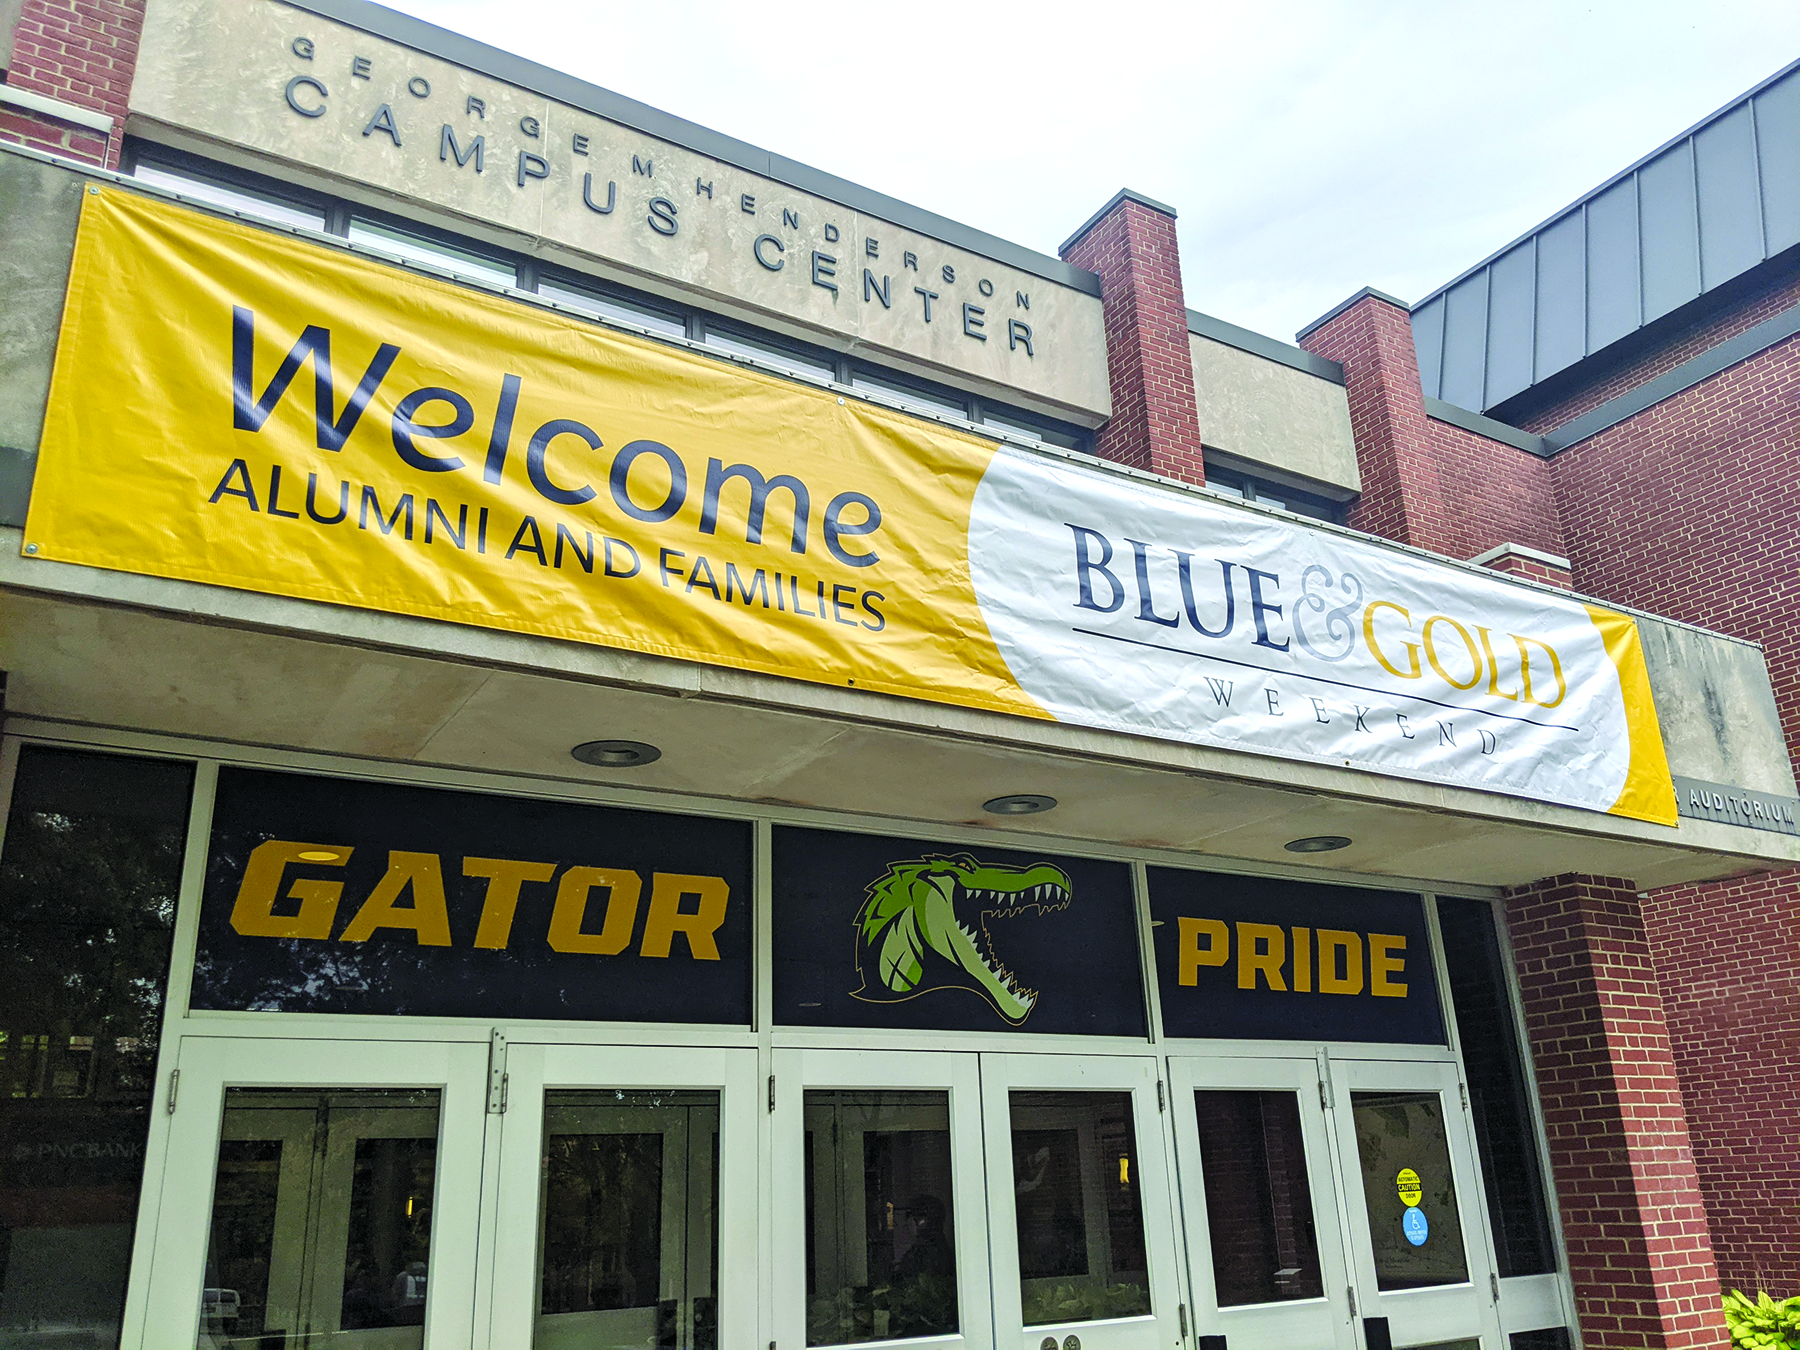 Decorations for Blue and Gold weekend hang from the front of the Henderson Campus Center on the afternoon of Thursday, Sept. 28.